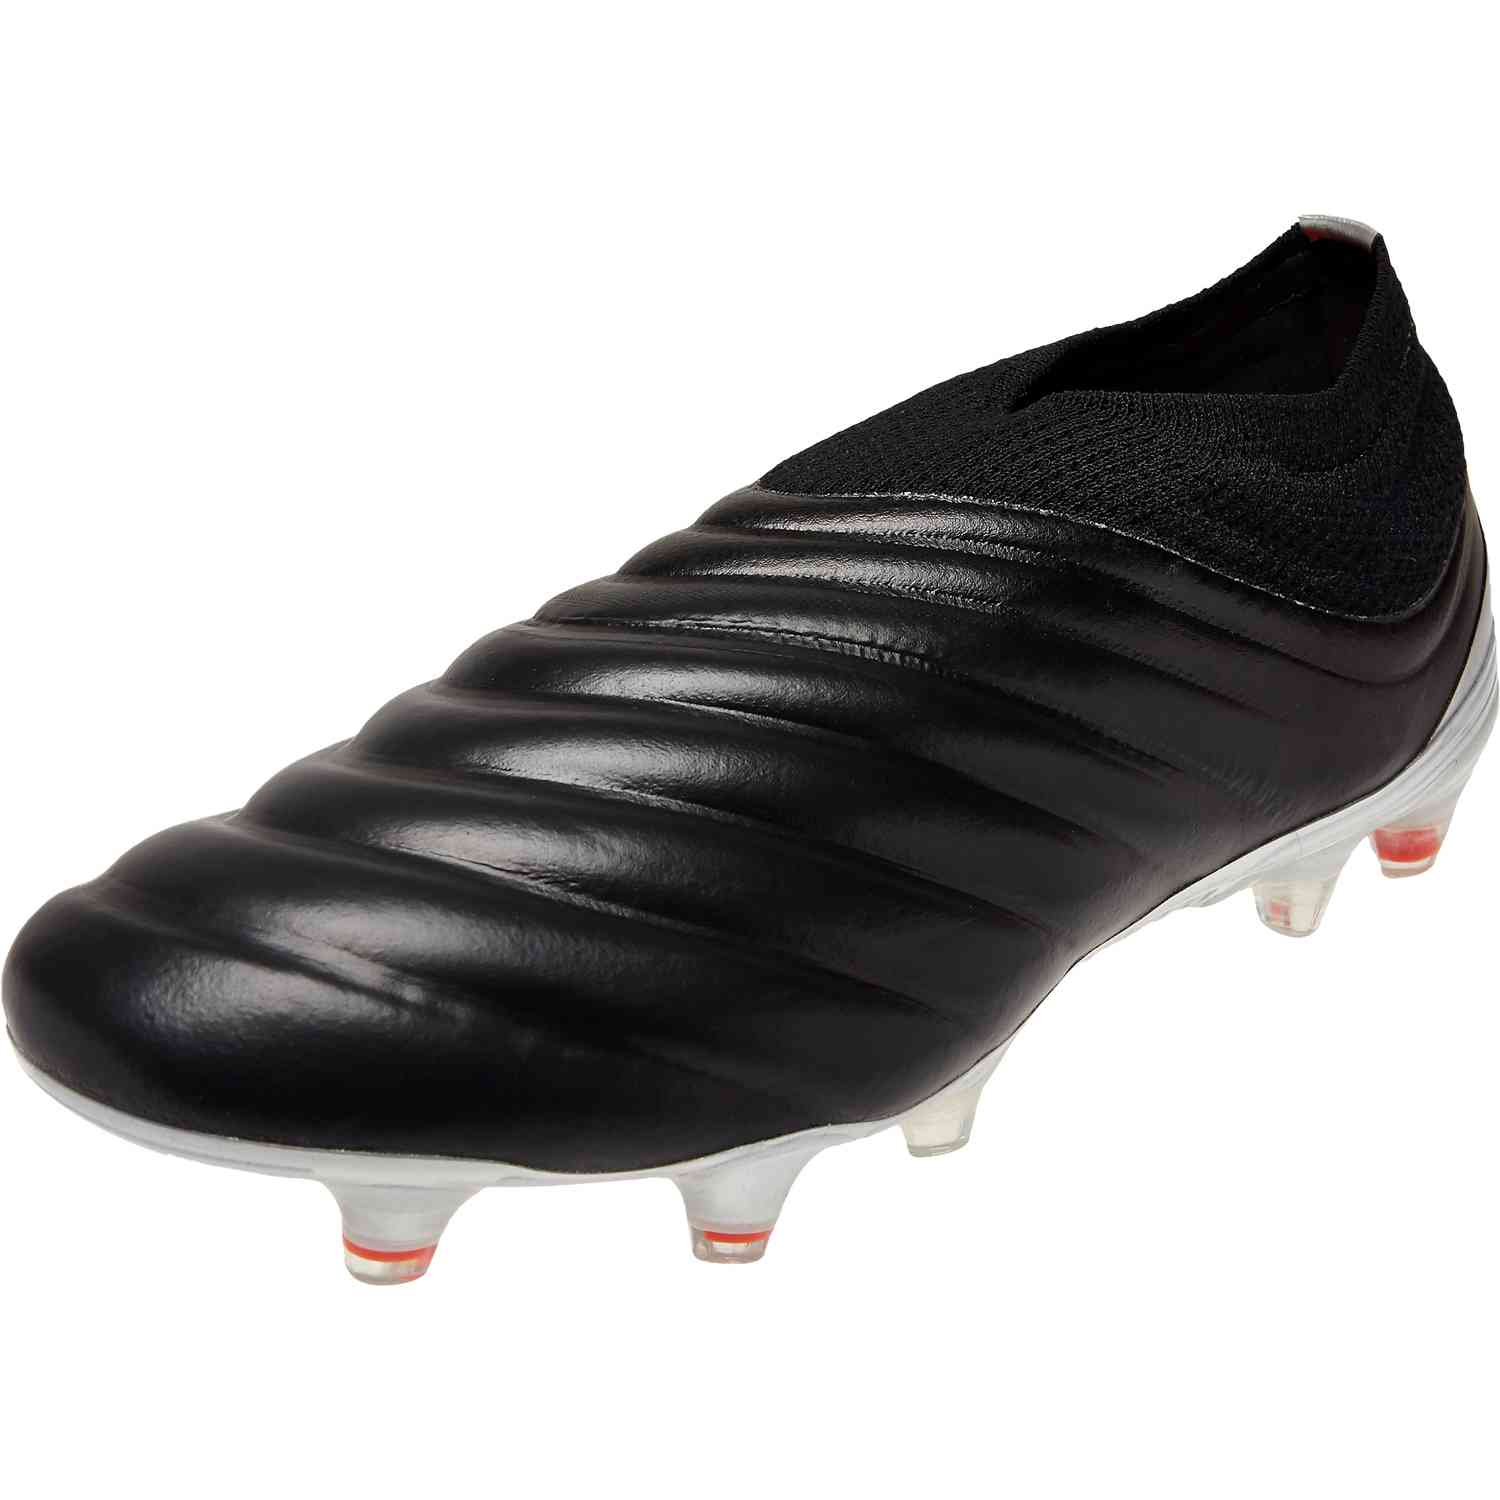 Adidas Copa Plus, Buy Hotsell, 53% OFF,